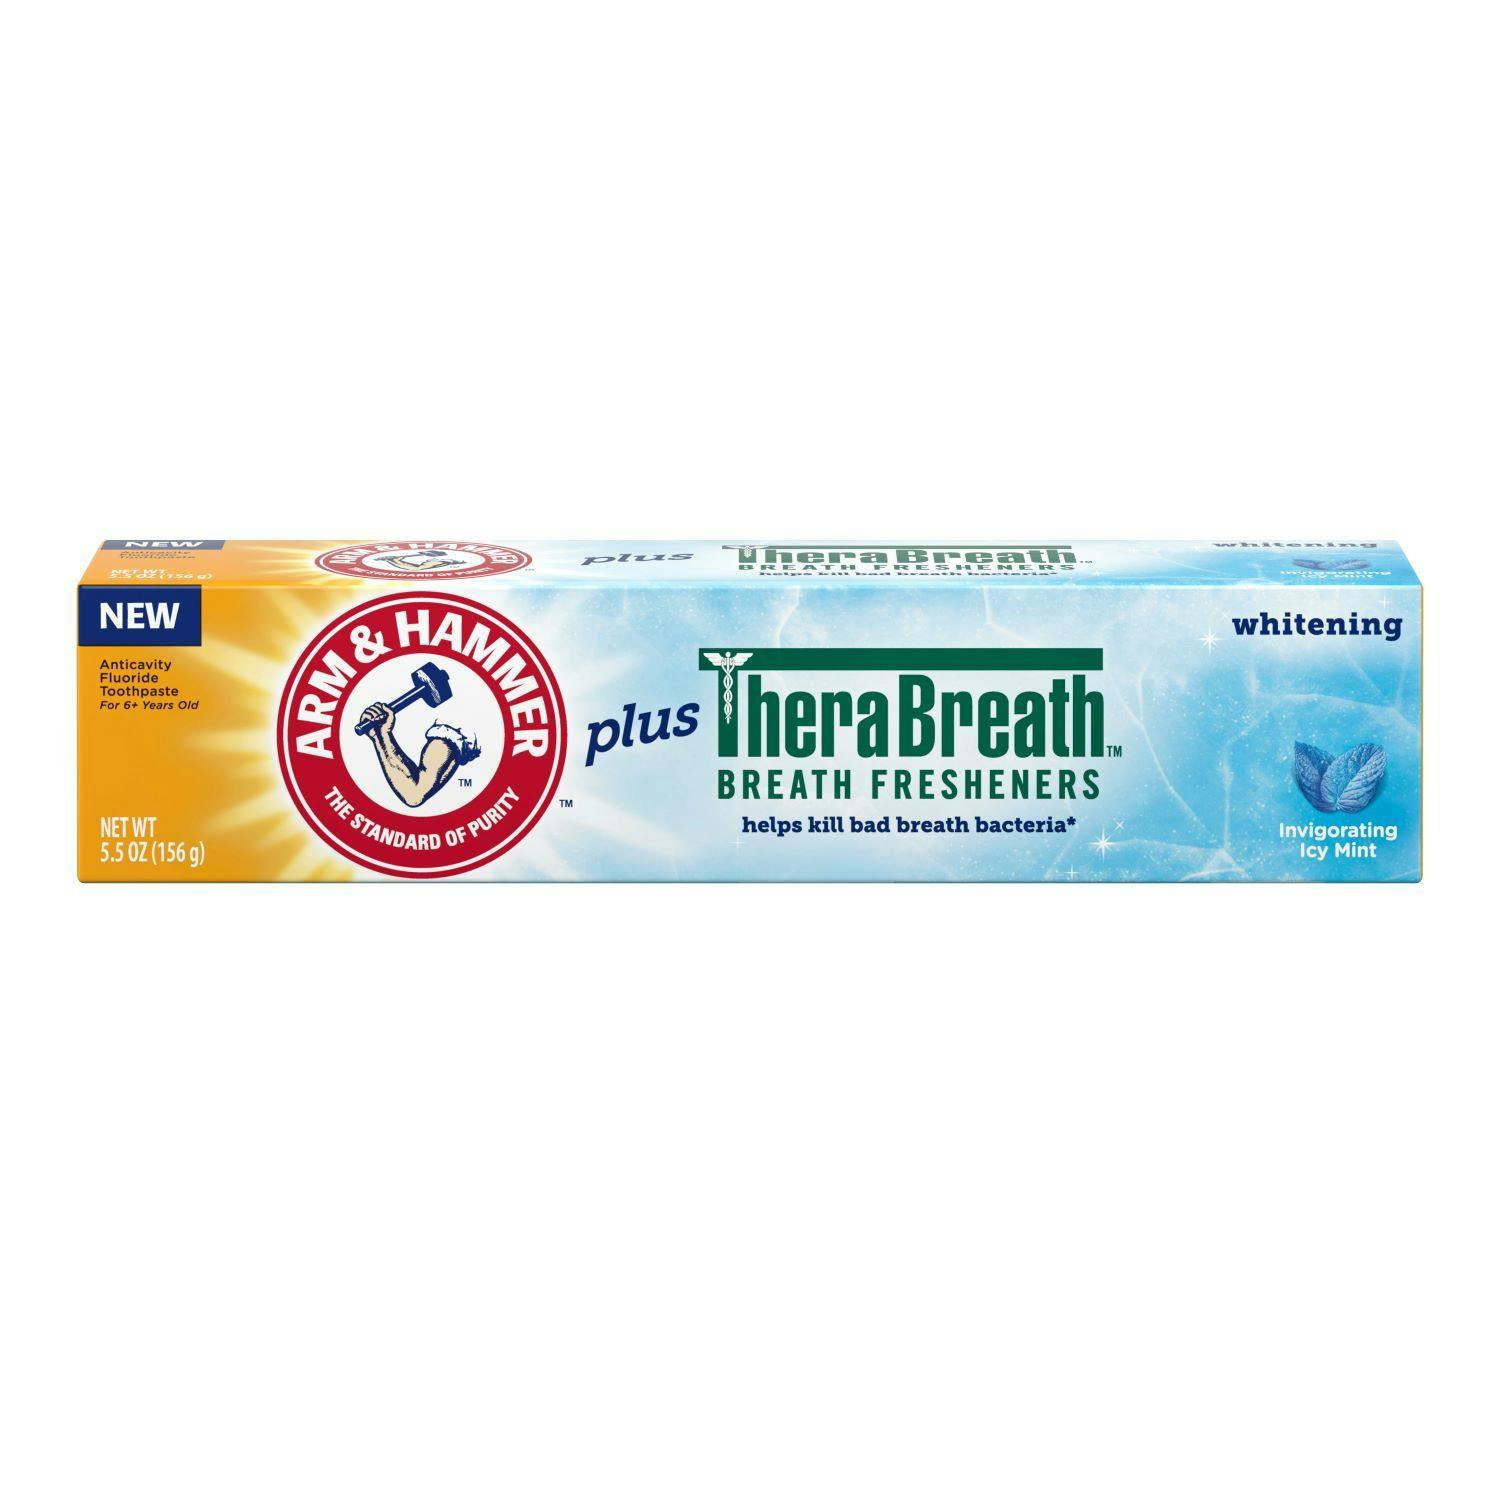 New ARM & HAMMER Plus TheraBreath Toothpaste Features Whitening and Fresh Breath Benefits | Image Credit: © ARM & HAMMER